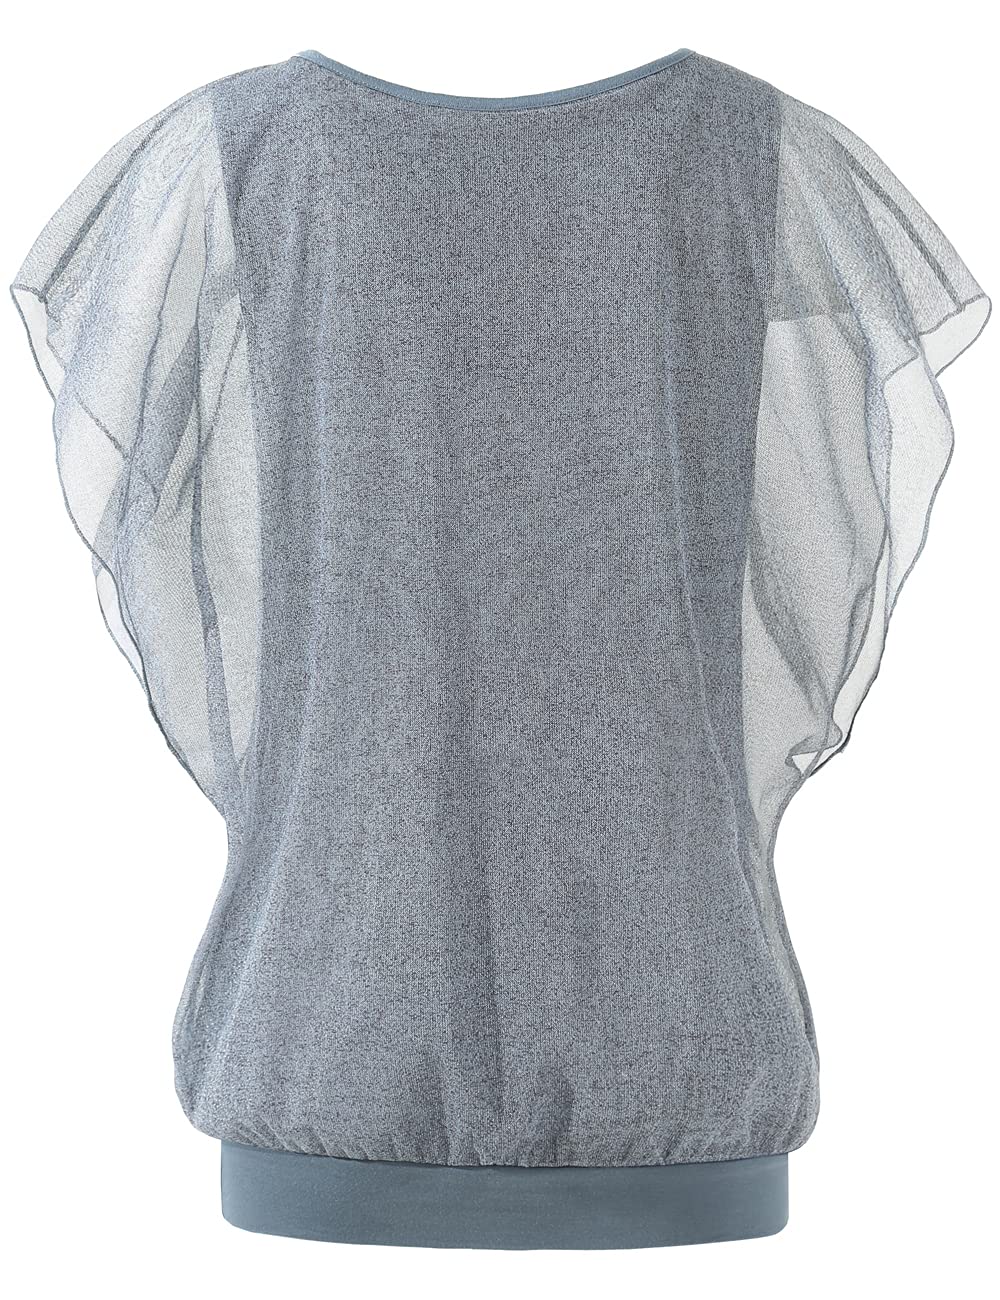 BAISHENGGT Unique Grey Women's Printed Flouncing Flared Short Sleeve Mesh Blouse Tops